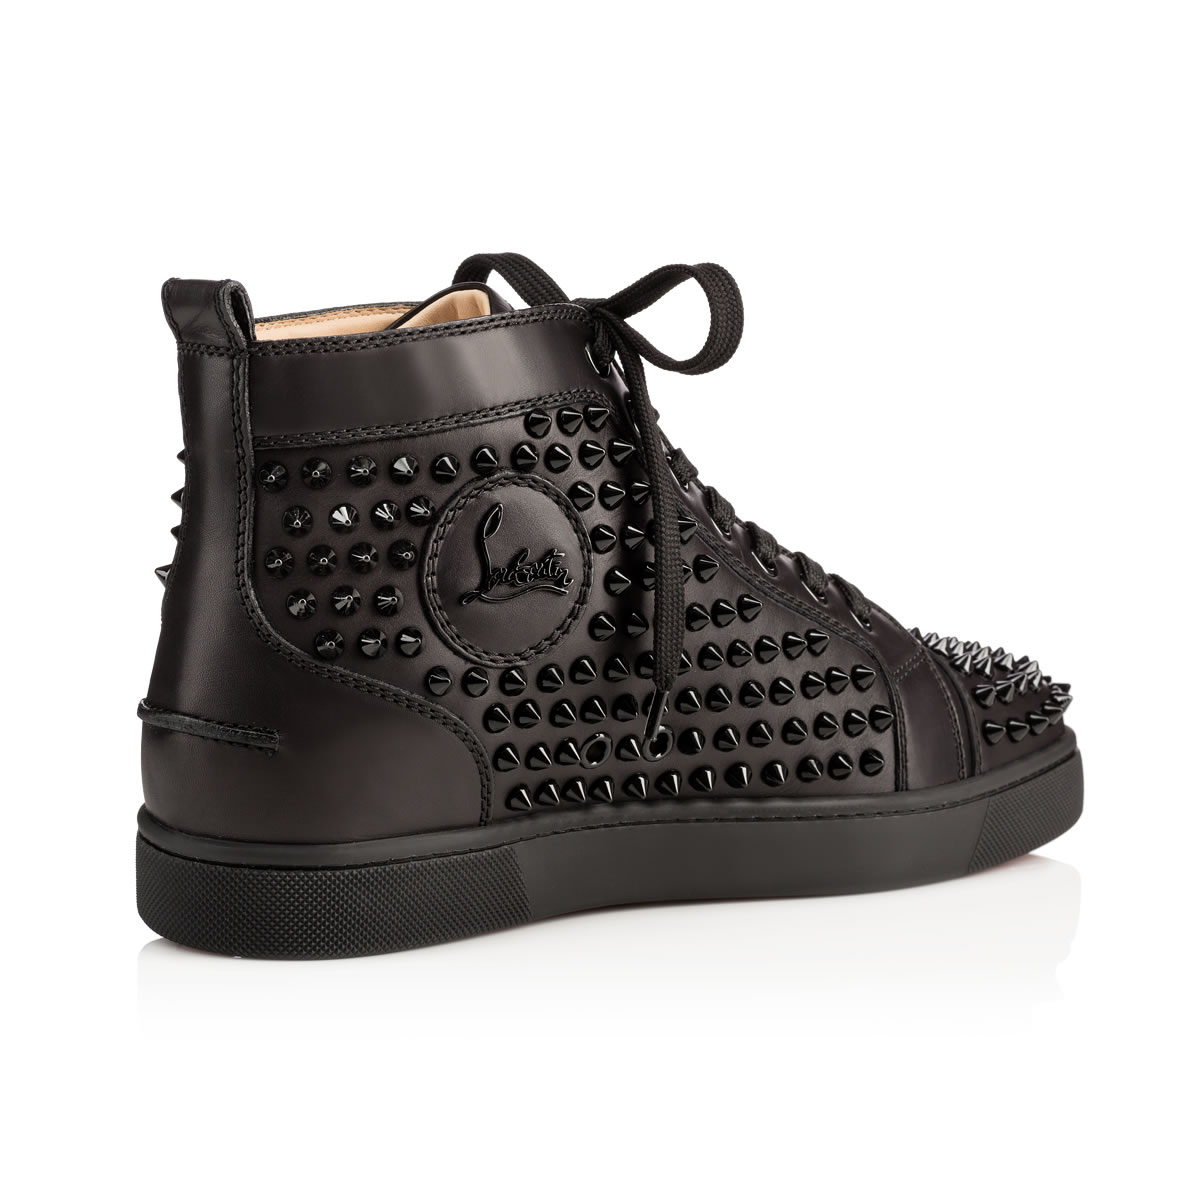 Louis - Sneakers - Calf and spikes - Black - Christian Louboutin